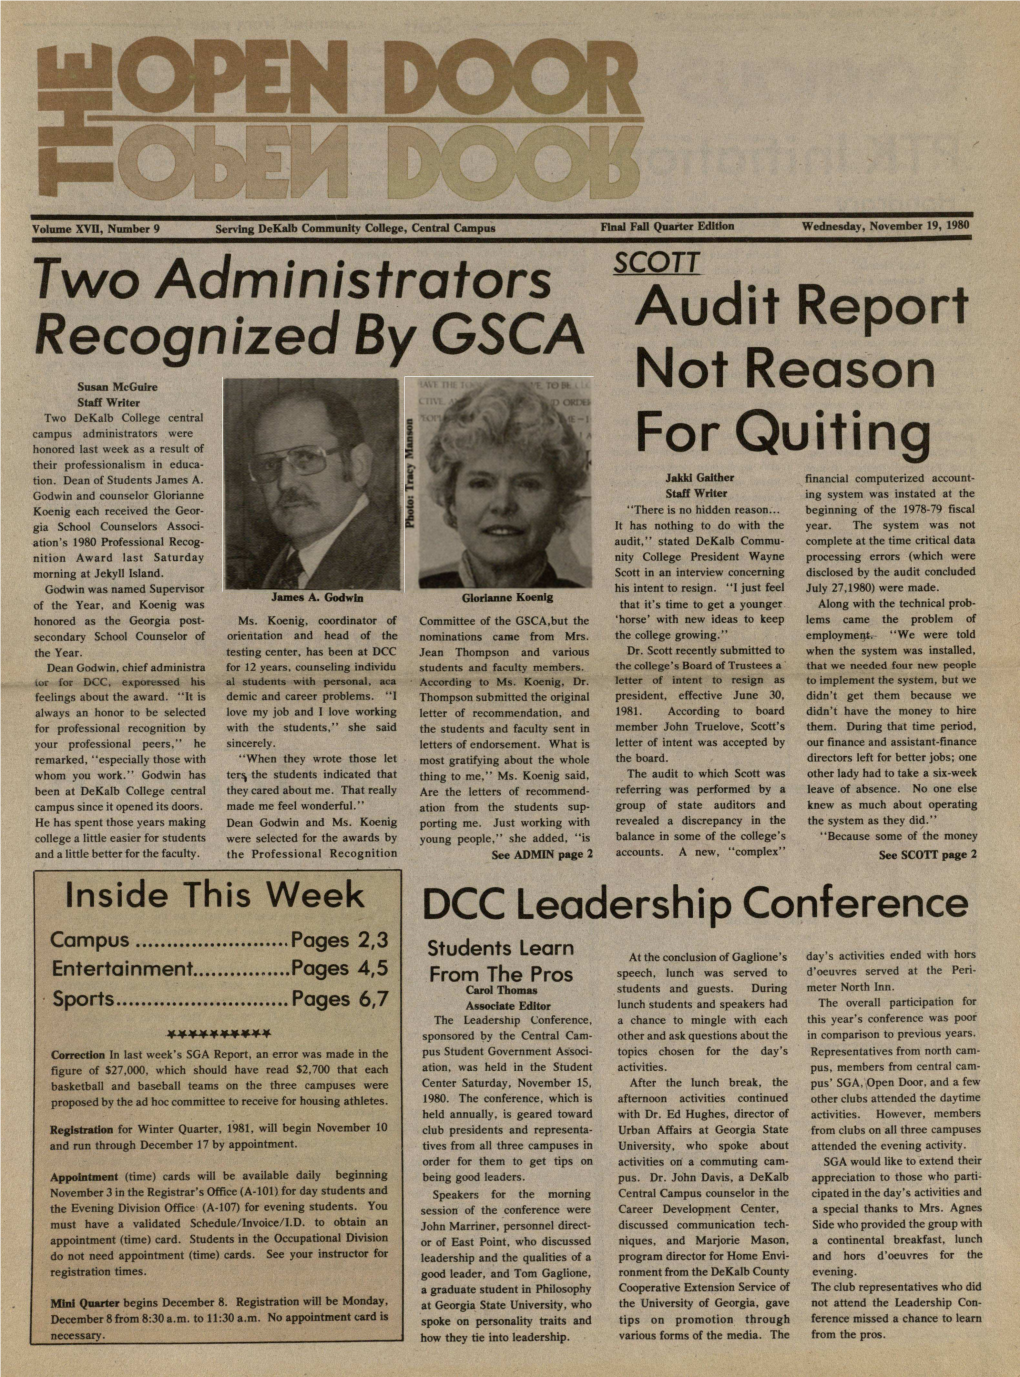 Audit Report Not Reason for Quiting